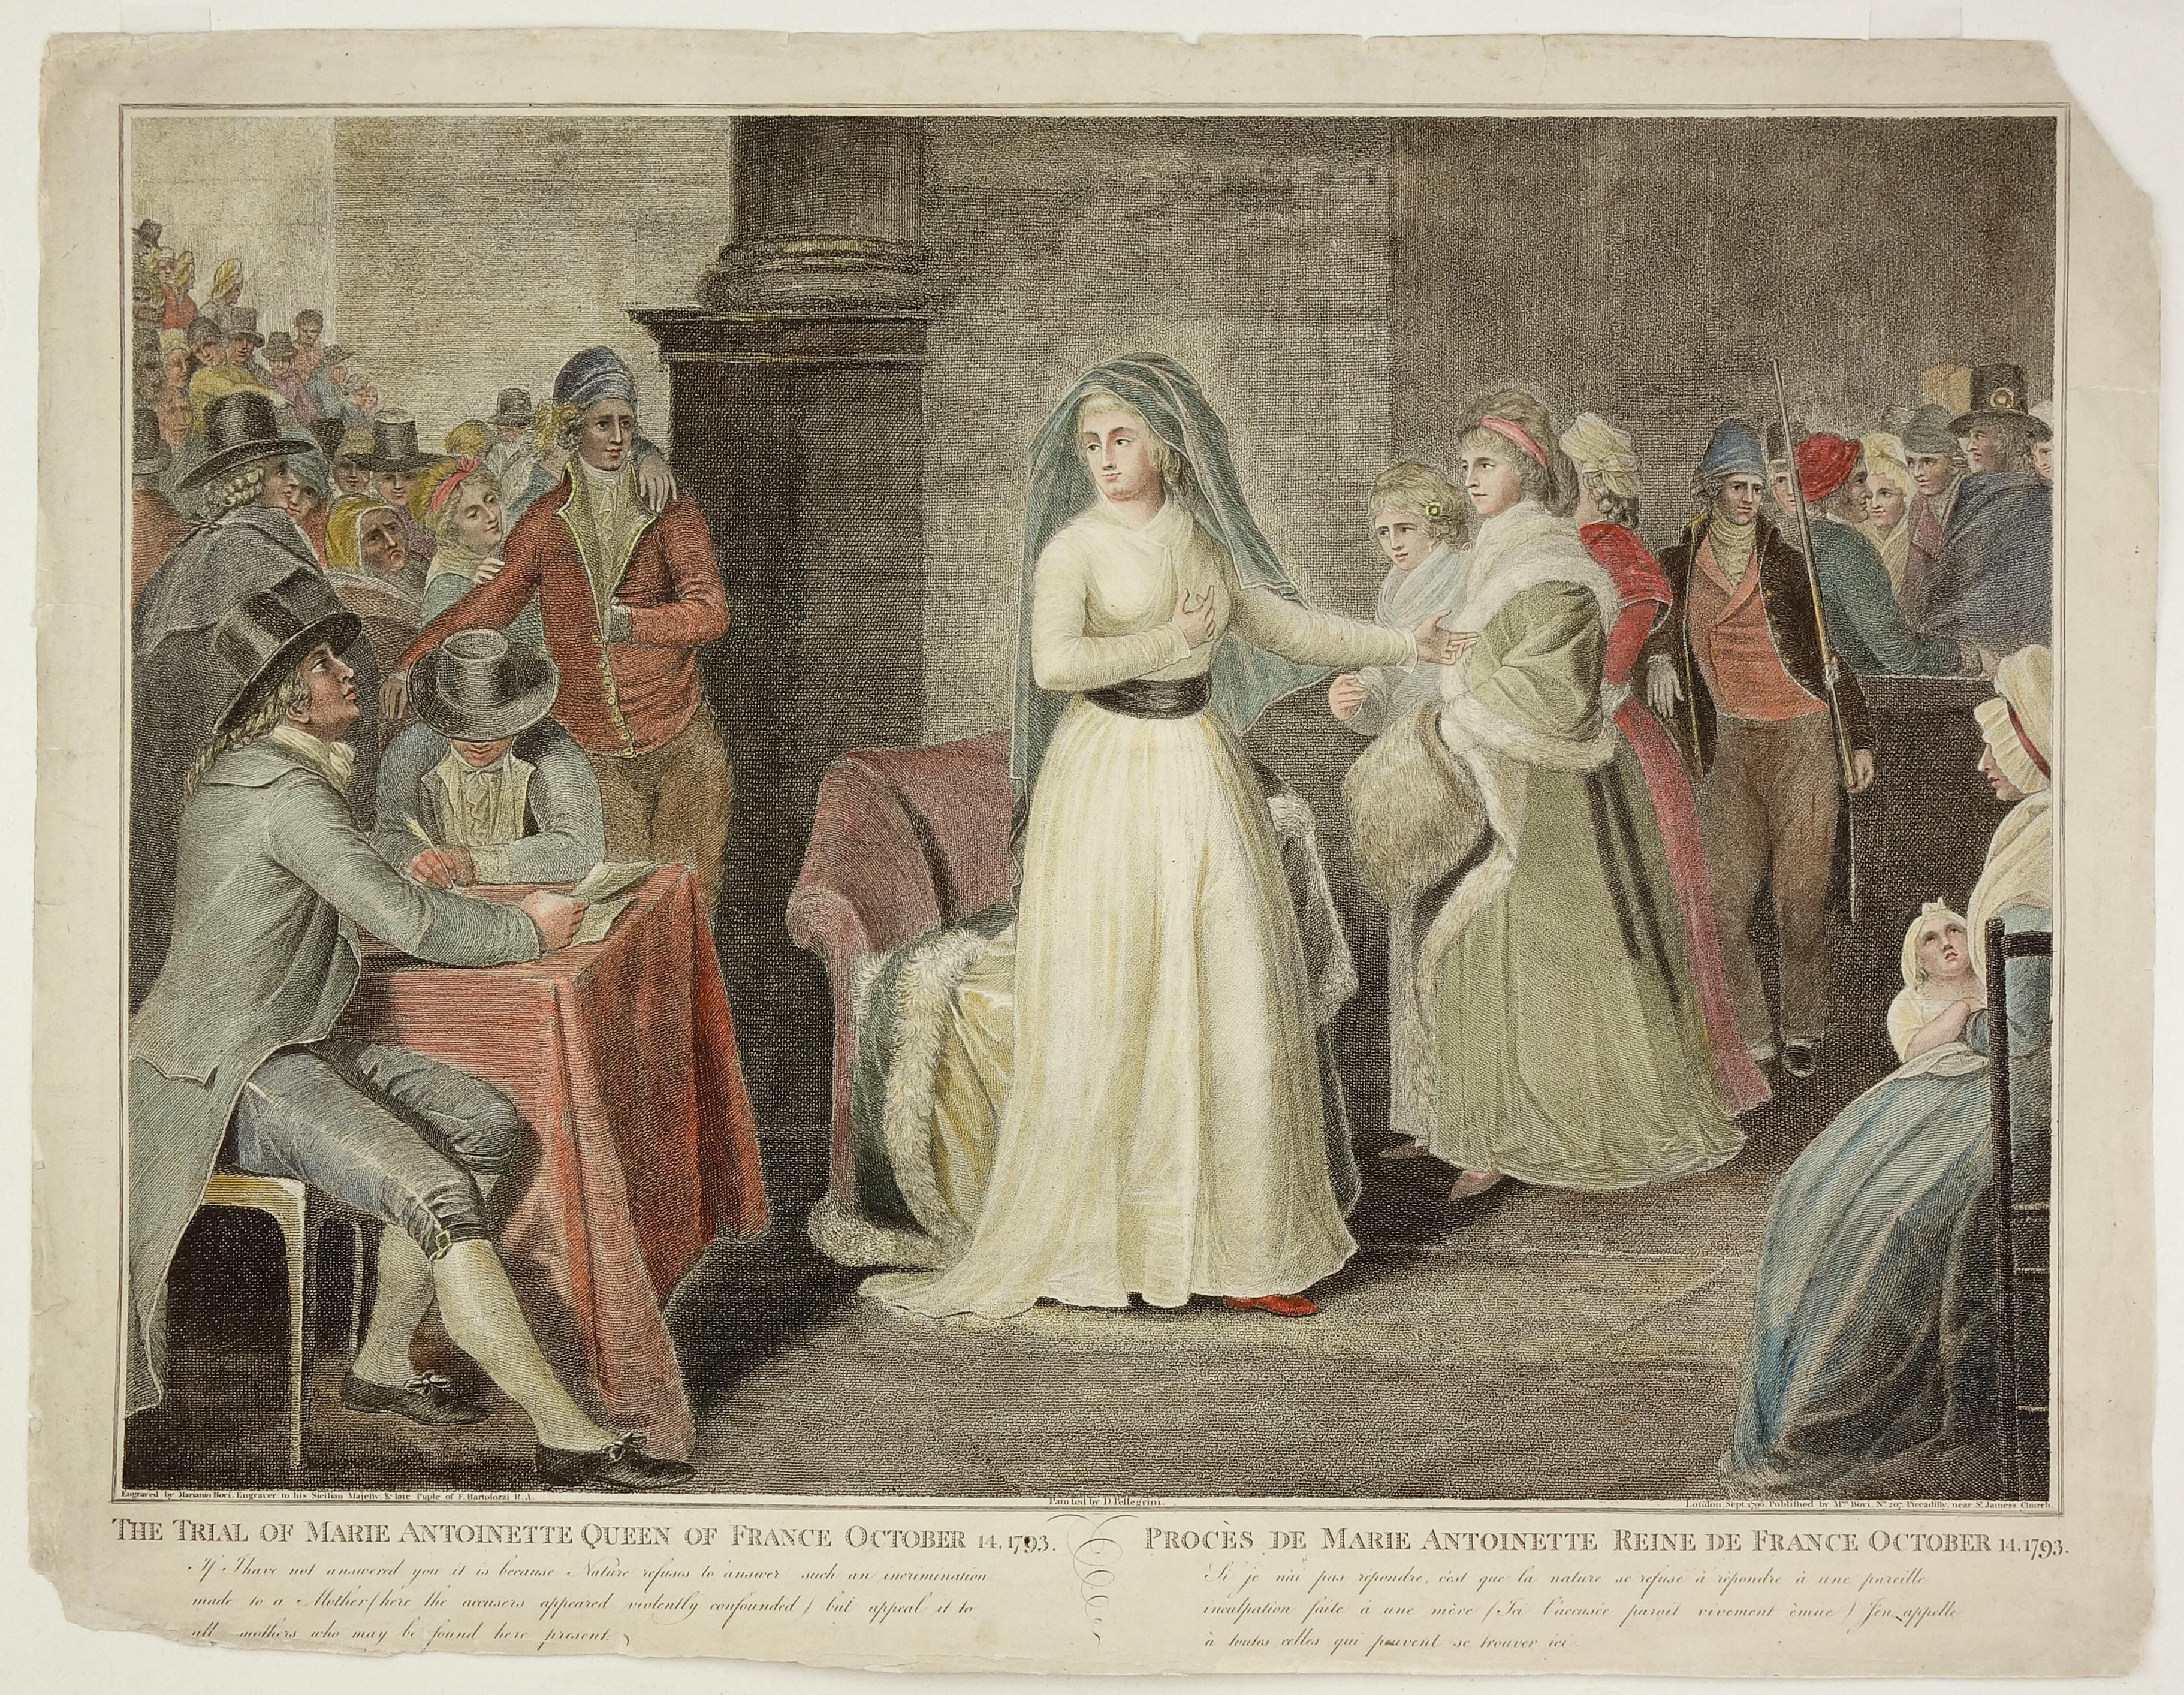 The Trial of Marie Antoinette Queen of France October 14, 1793